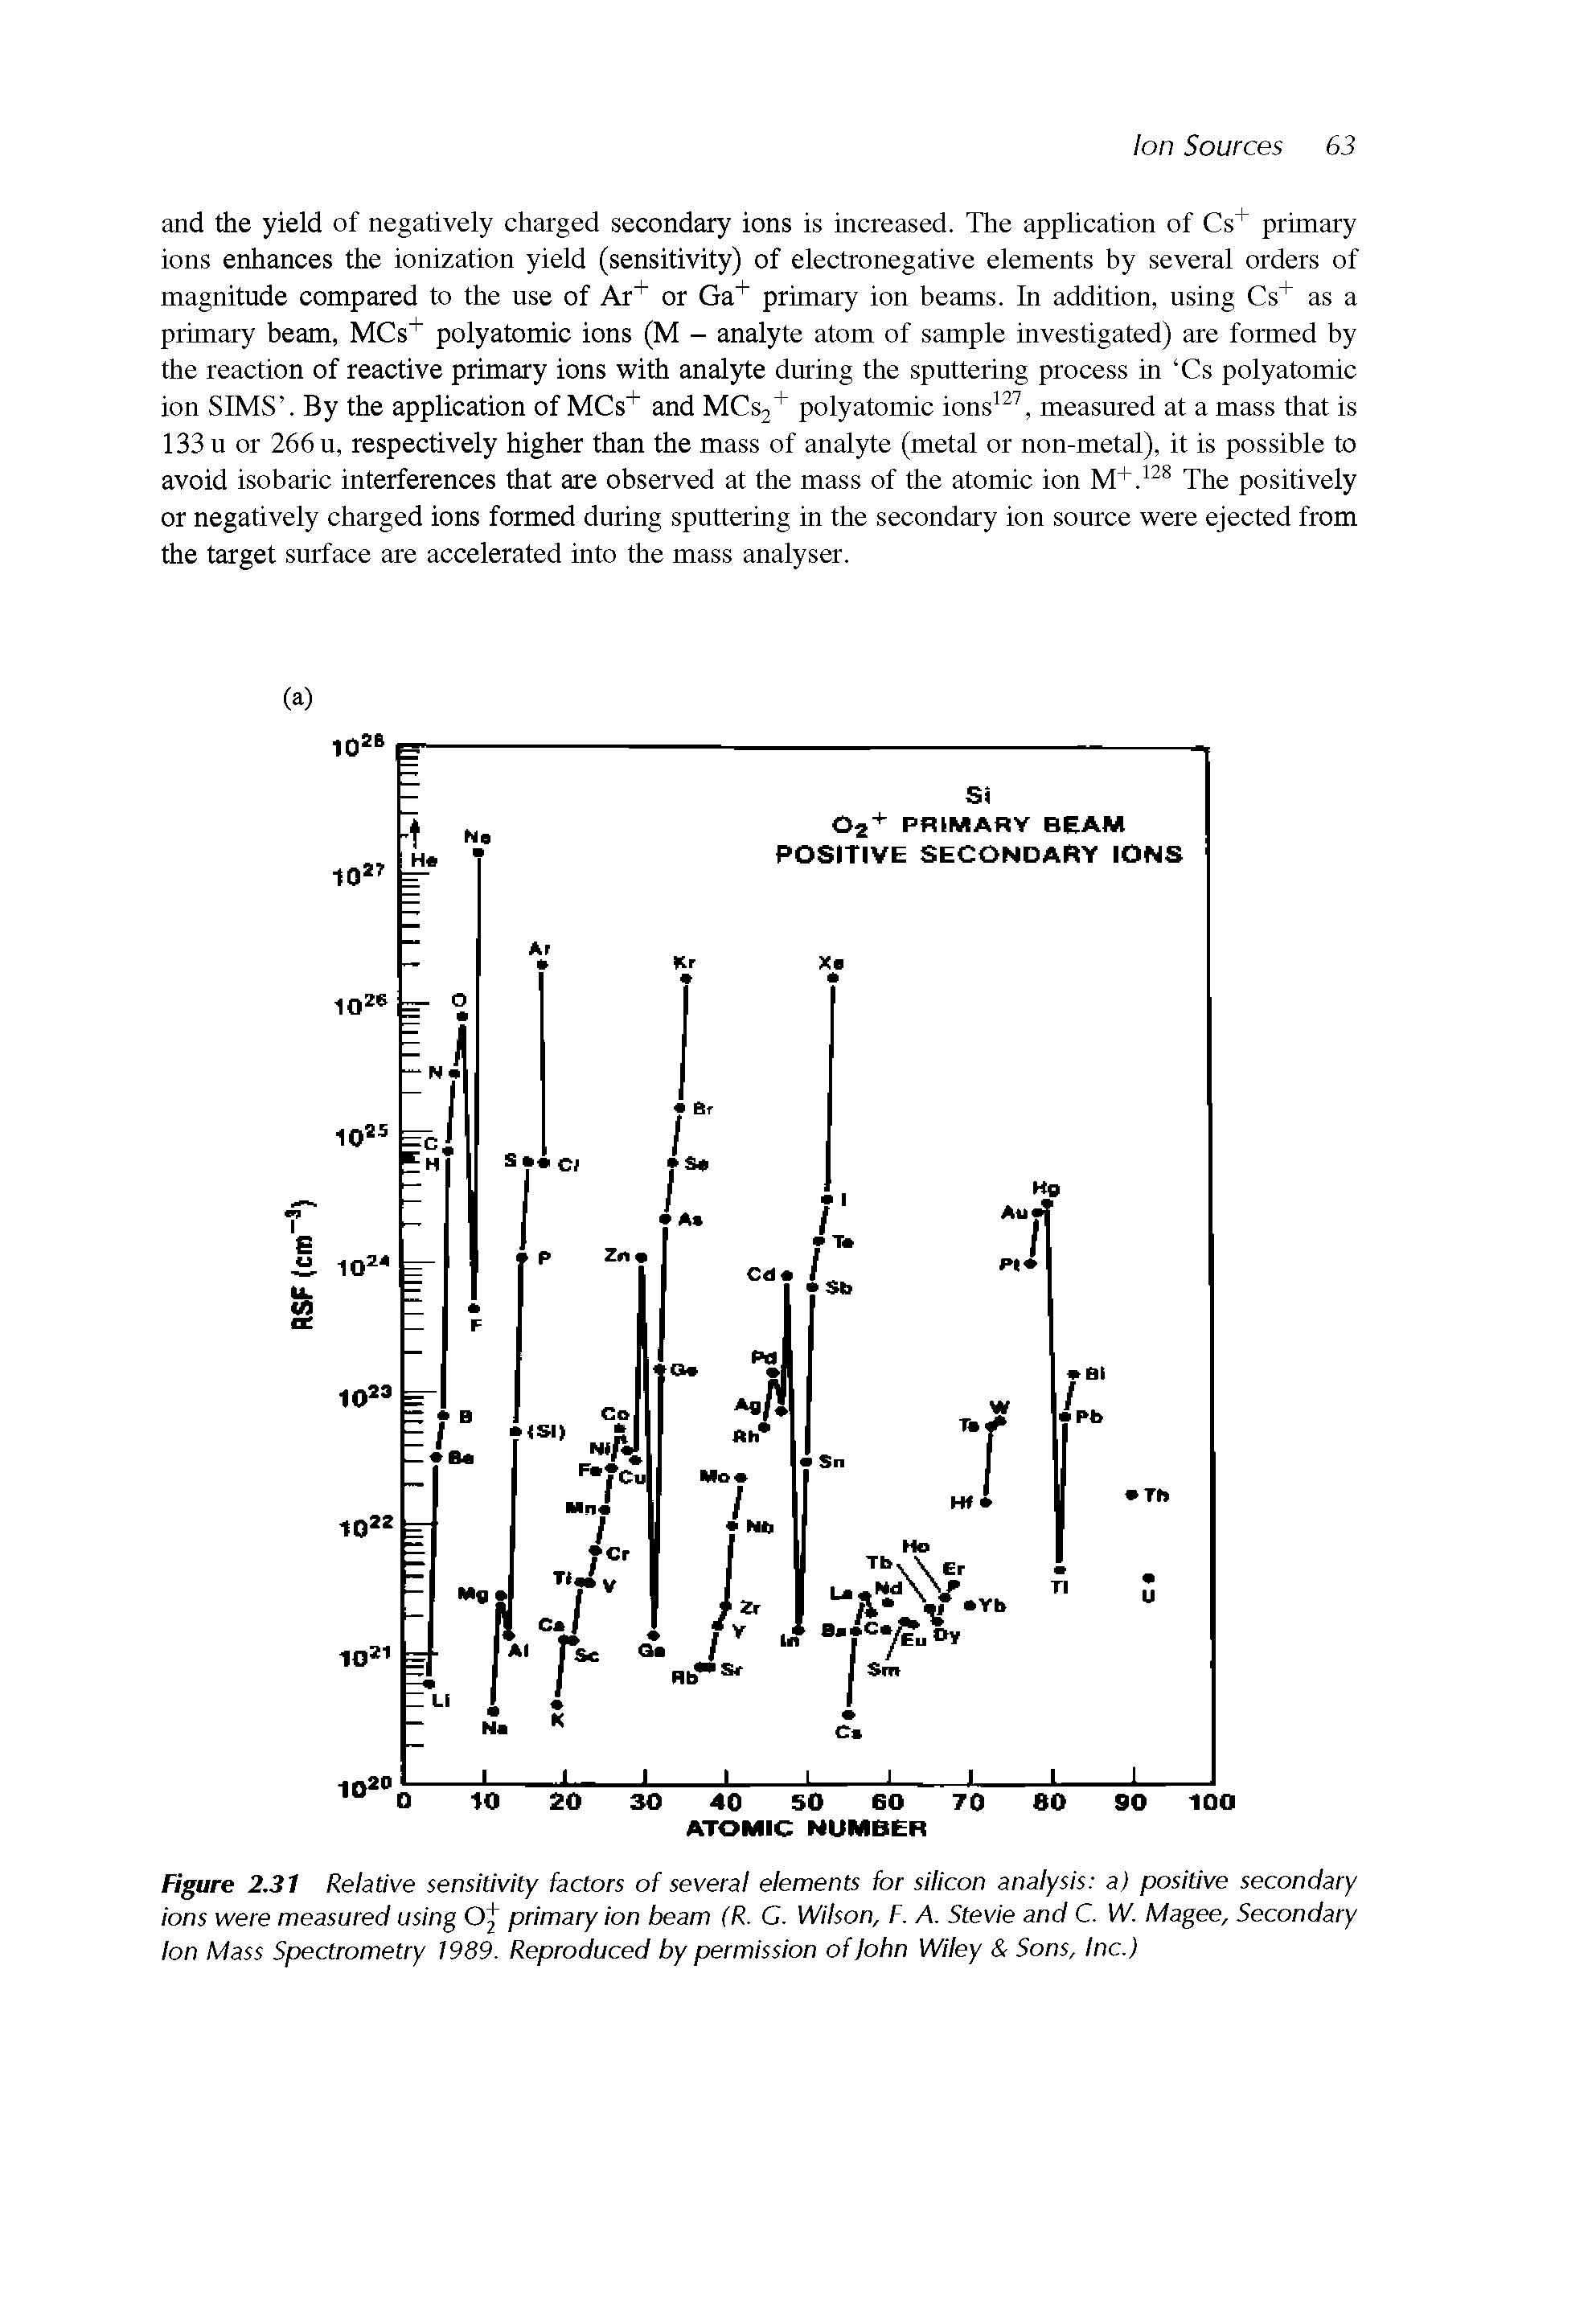 Figure 2.31 Relative sensitivity factors of several elements for silicon analysis a) positive secondary ions were measured using Oj primary ion beam (R. C. Wilson, F. A. Stevie and C. W. Magee, Secondary Ion Mass Spectrometry 1989. Reproduced by permission of John Wiley Sons, Inc.)...